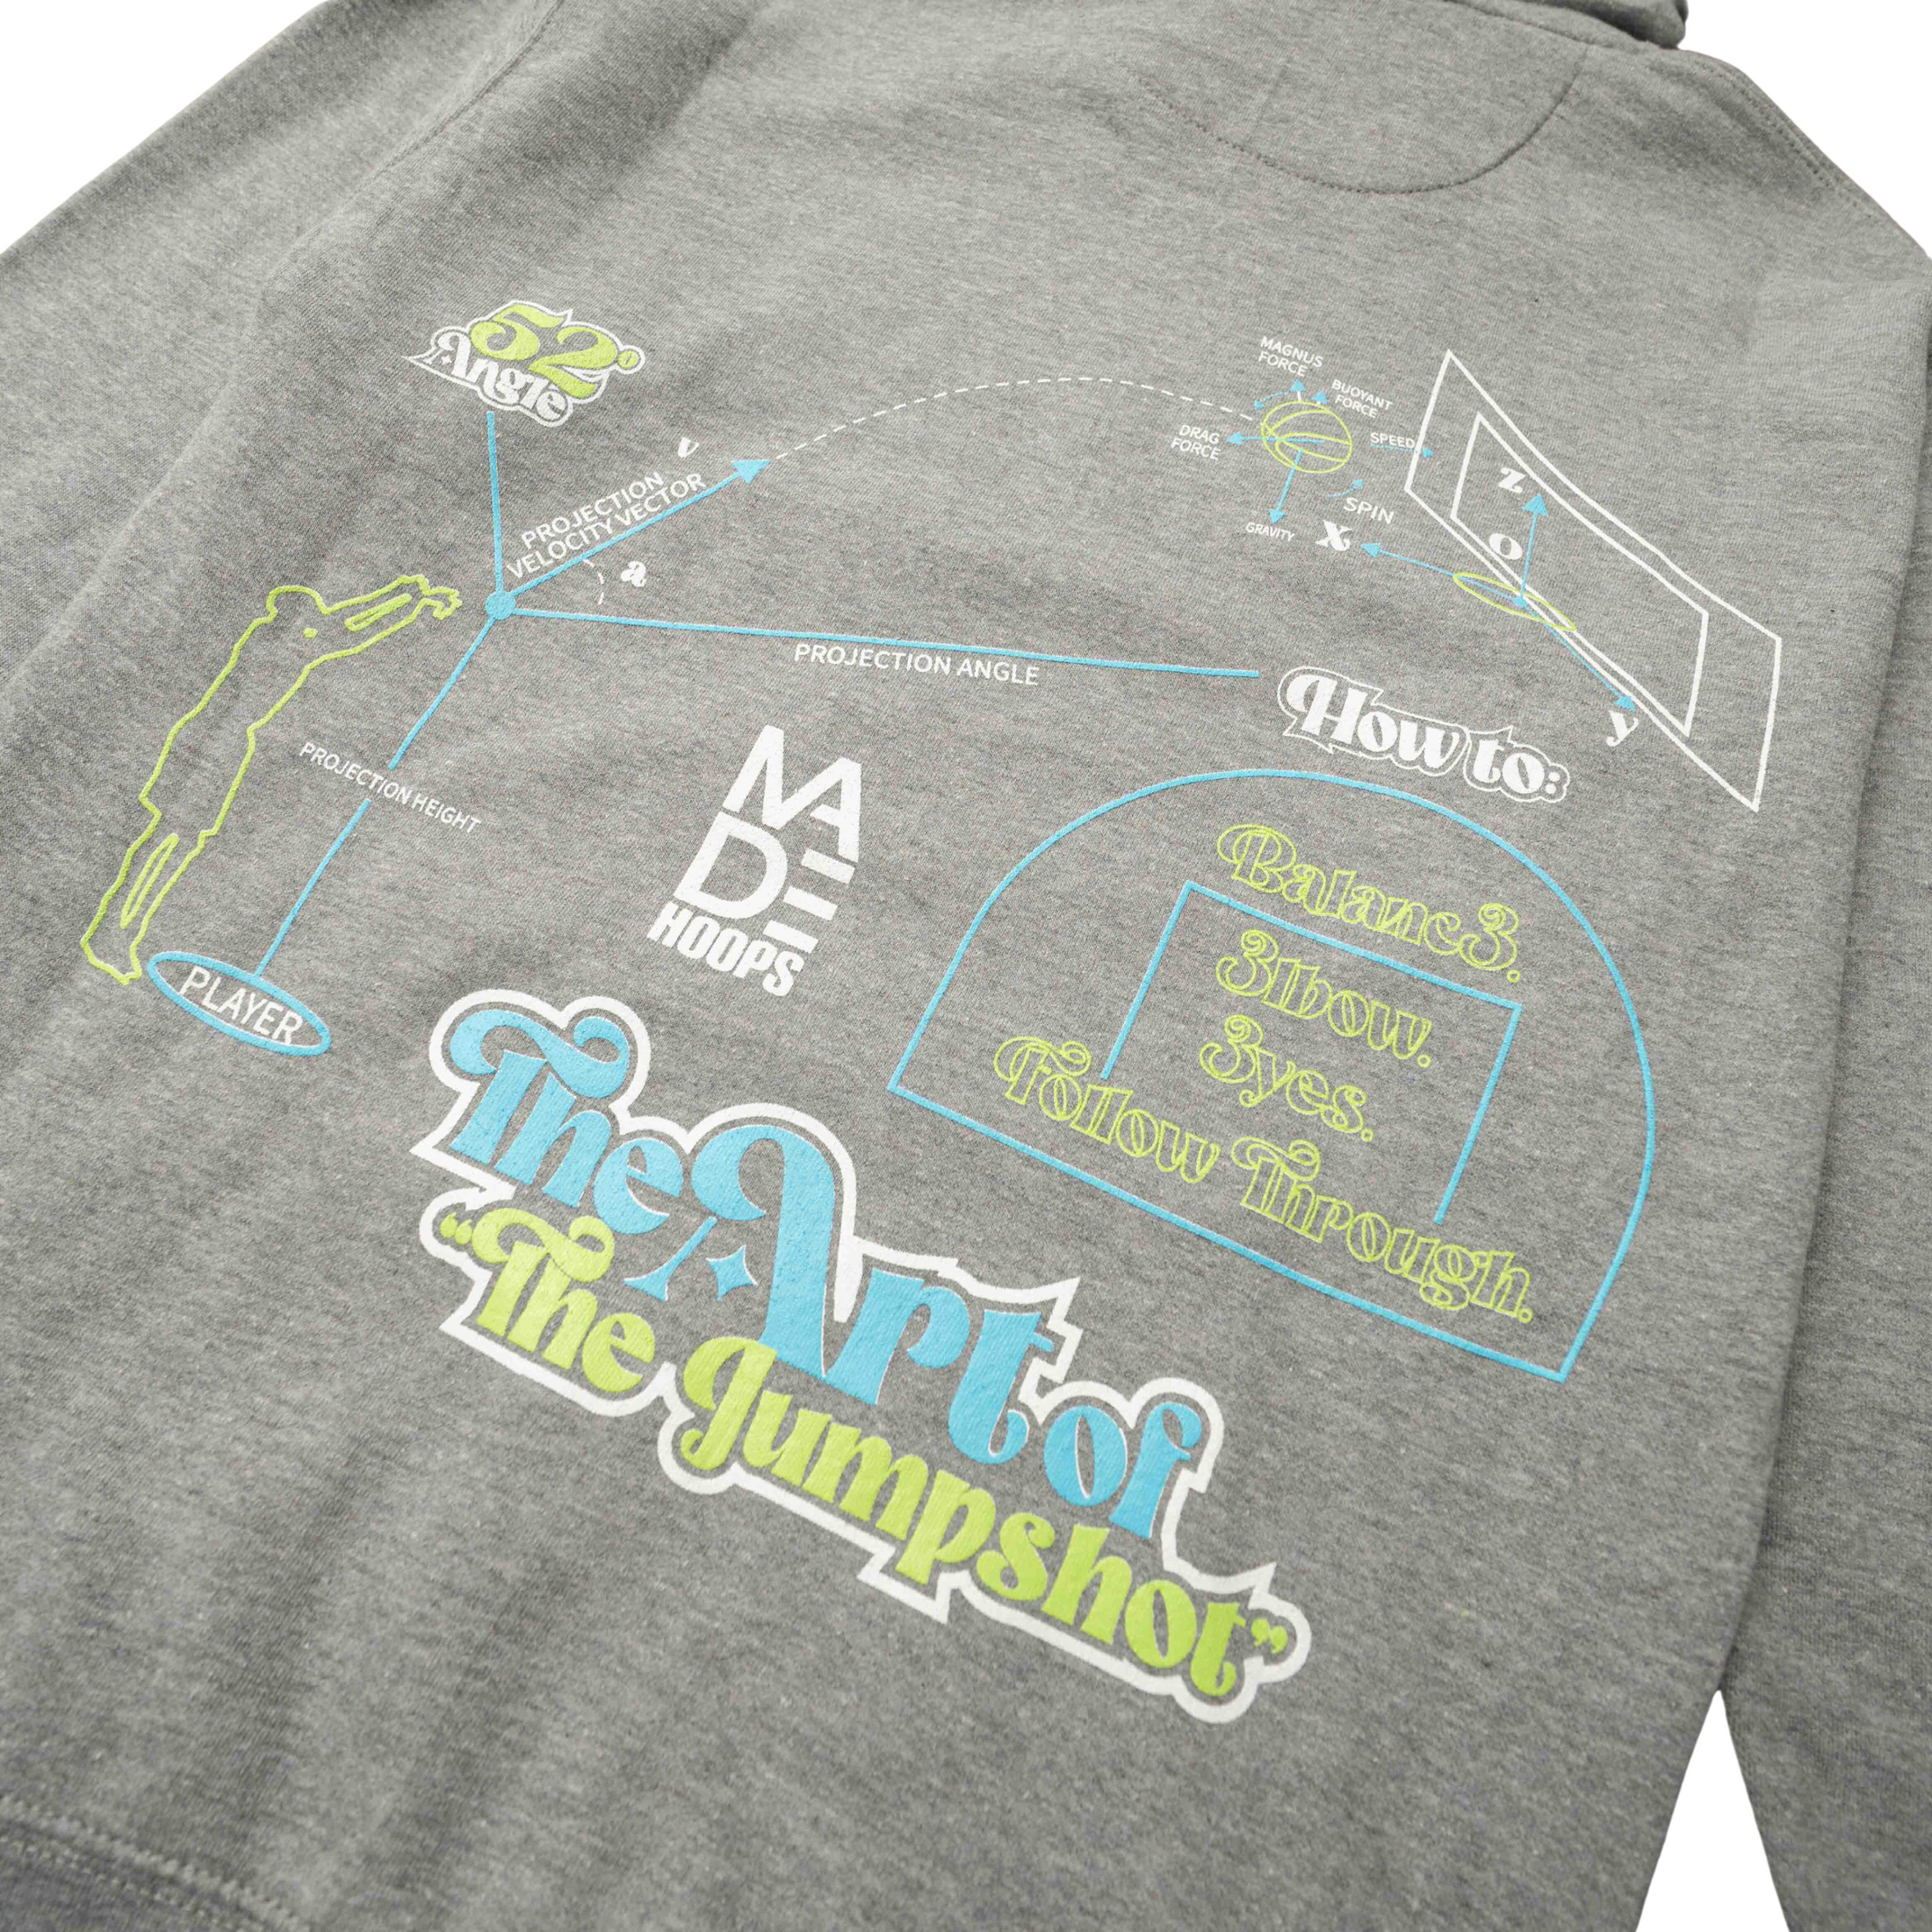 The Art of the Jumpshot Hoodie